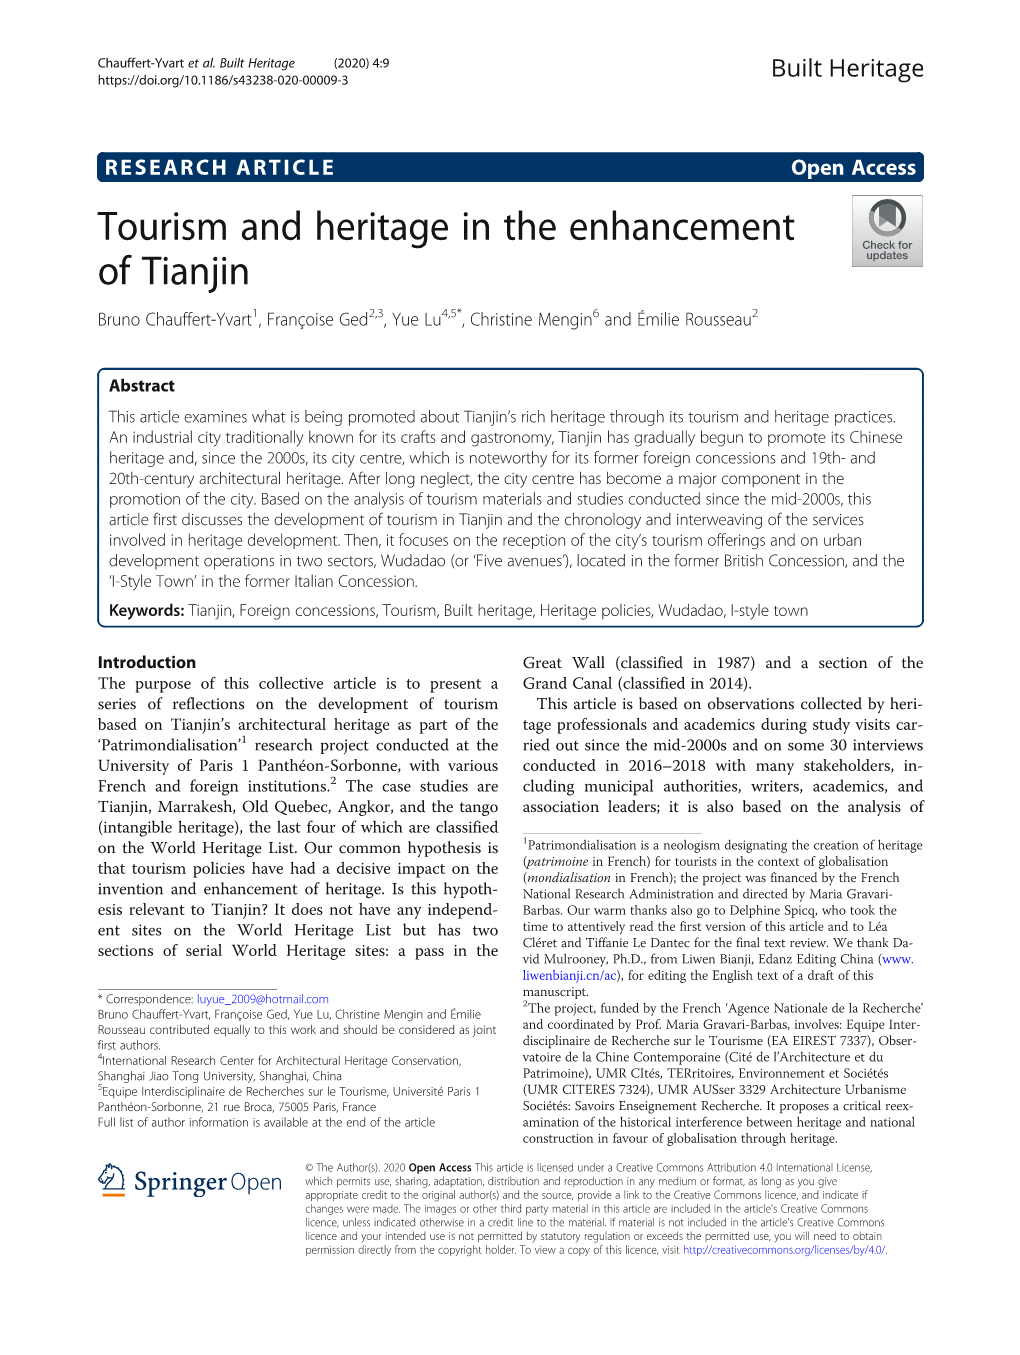 Tourism and Heritage in the Enhancement of Tianjin Bruno Chauffert-Yvart1, Françoise Ged2,3, Yue Lu4,5*, Christine Mengin6 and Émilie Rousseau2